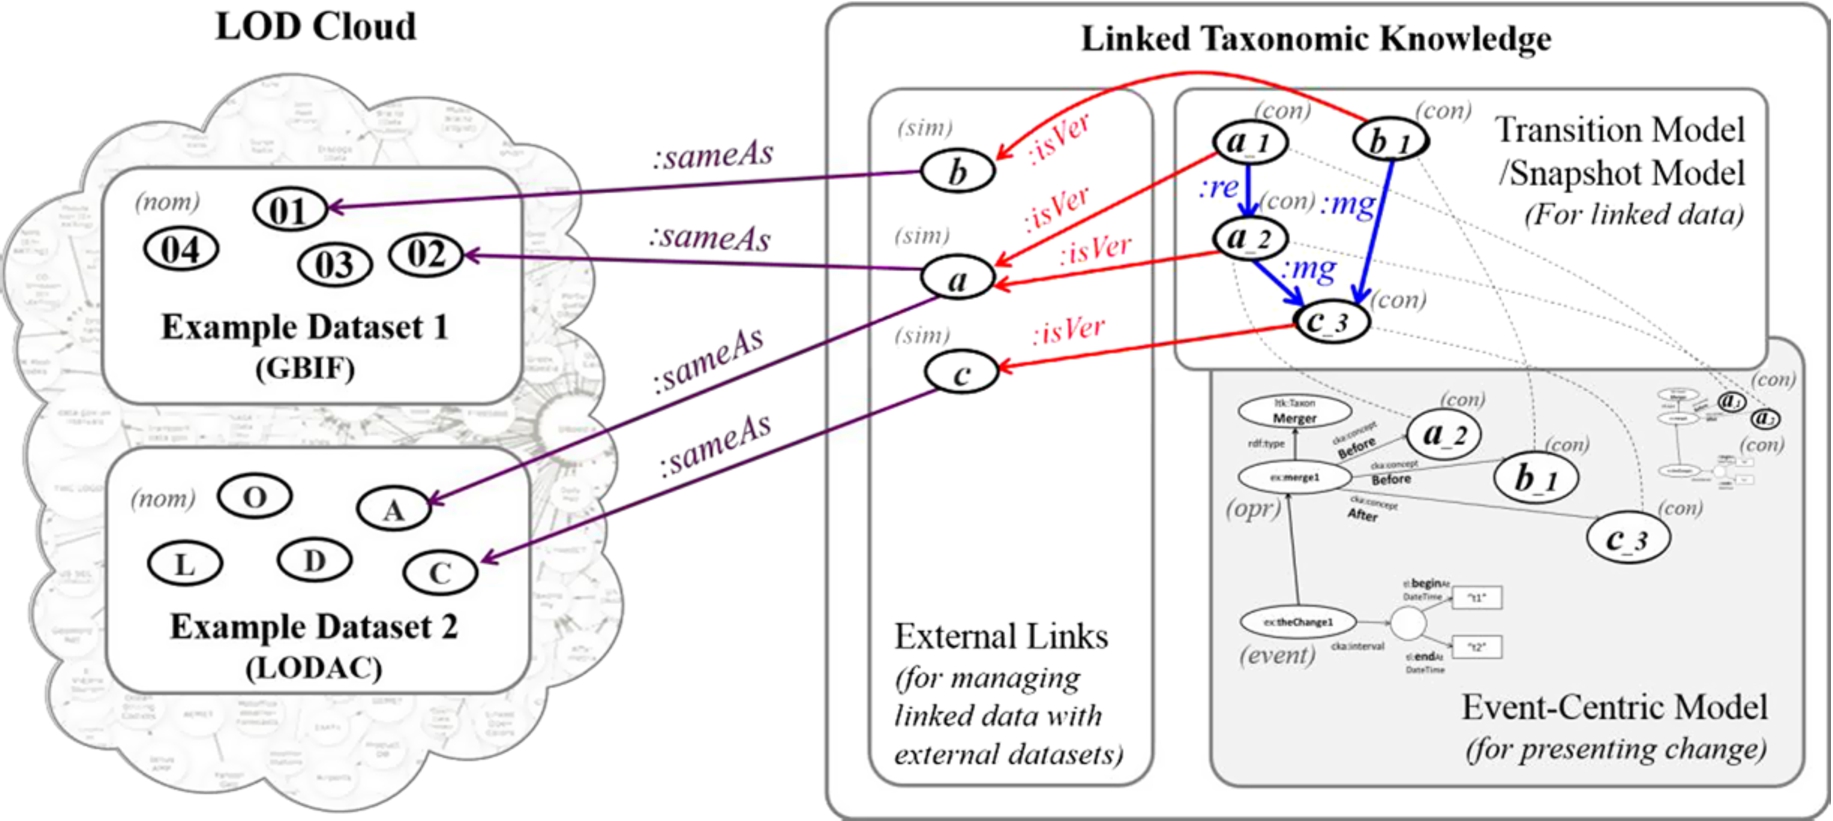 Role of LTK (right) in LOD Cloud (left) containing example datasets. Ovals with single alphabet or ID number are general concepts, ovals with version are versions of general concepts, dashed lines show same URIs, :same is owl:sameAs, :isVer is dct:isVersionOf, :re is ltk:replacedInto, and :mg is ltk:mergedInto.